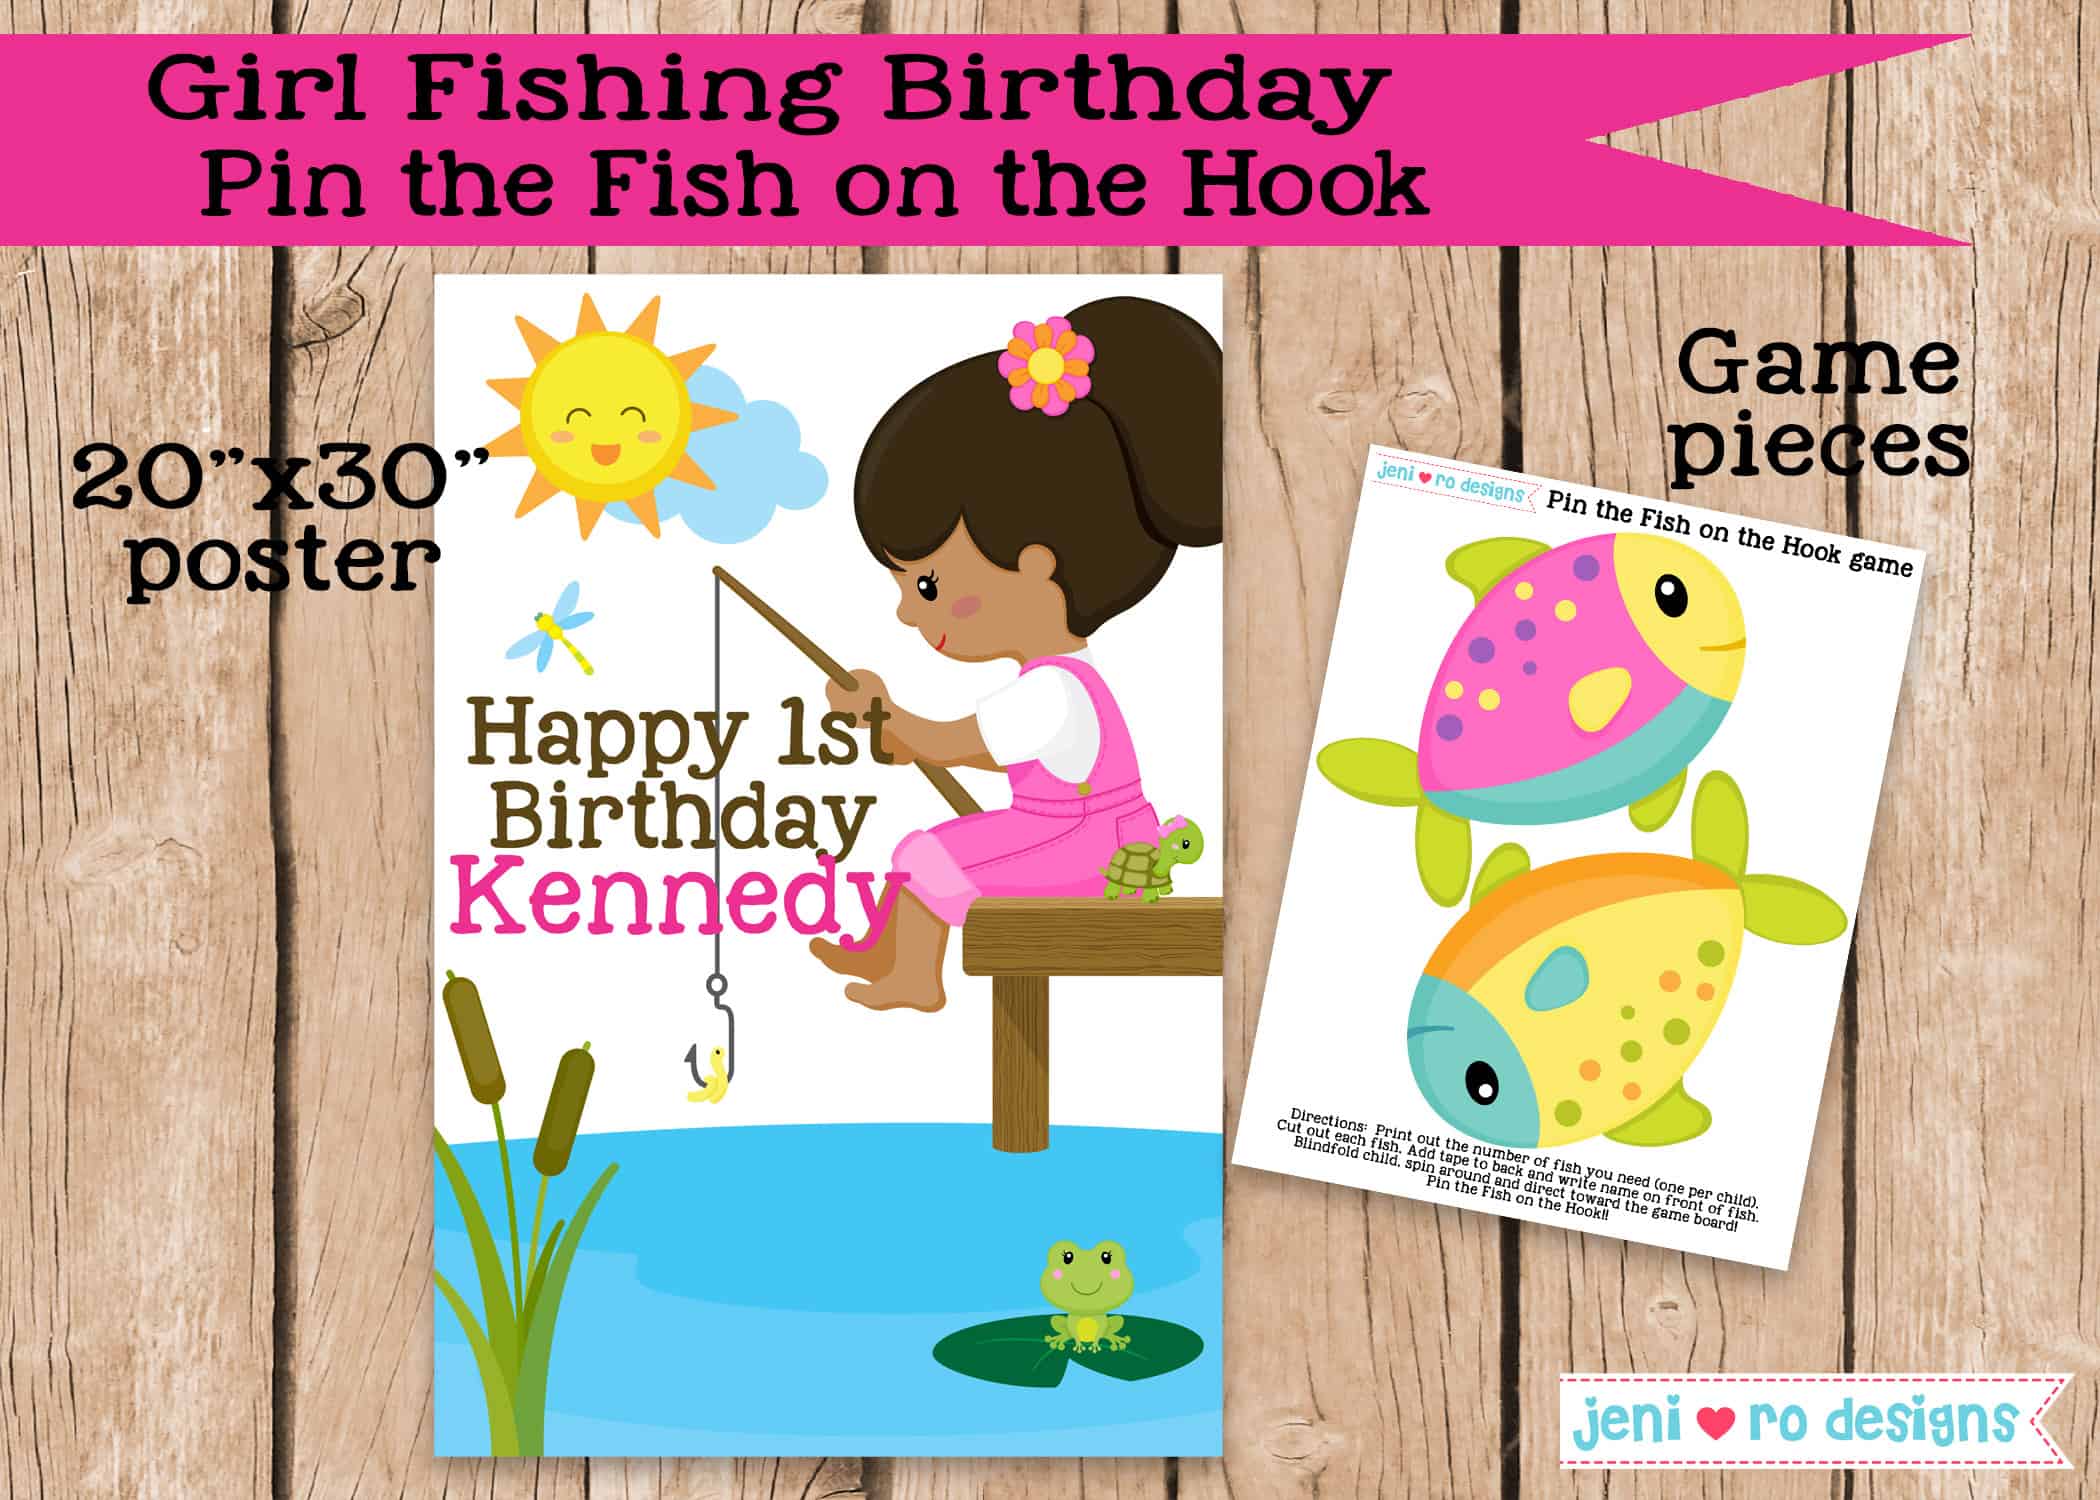 Party Game - Pin the fish on the hook - Fishing Birthday